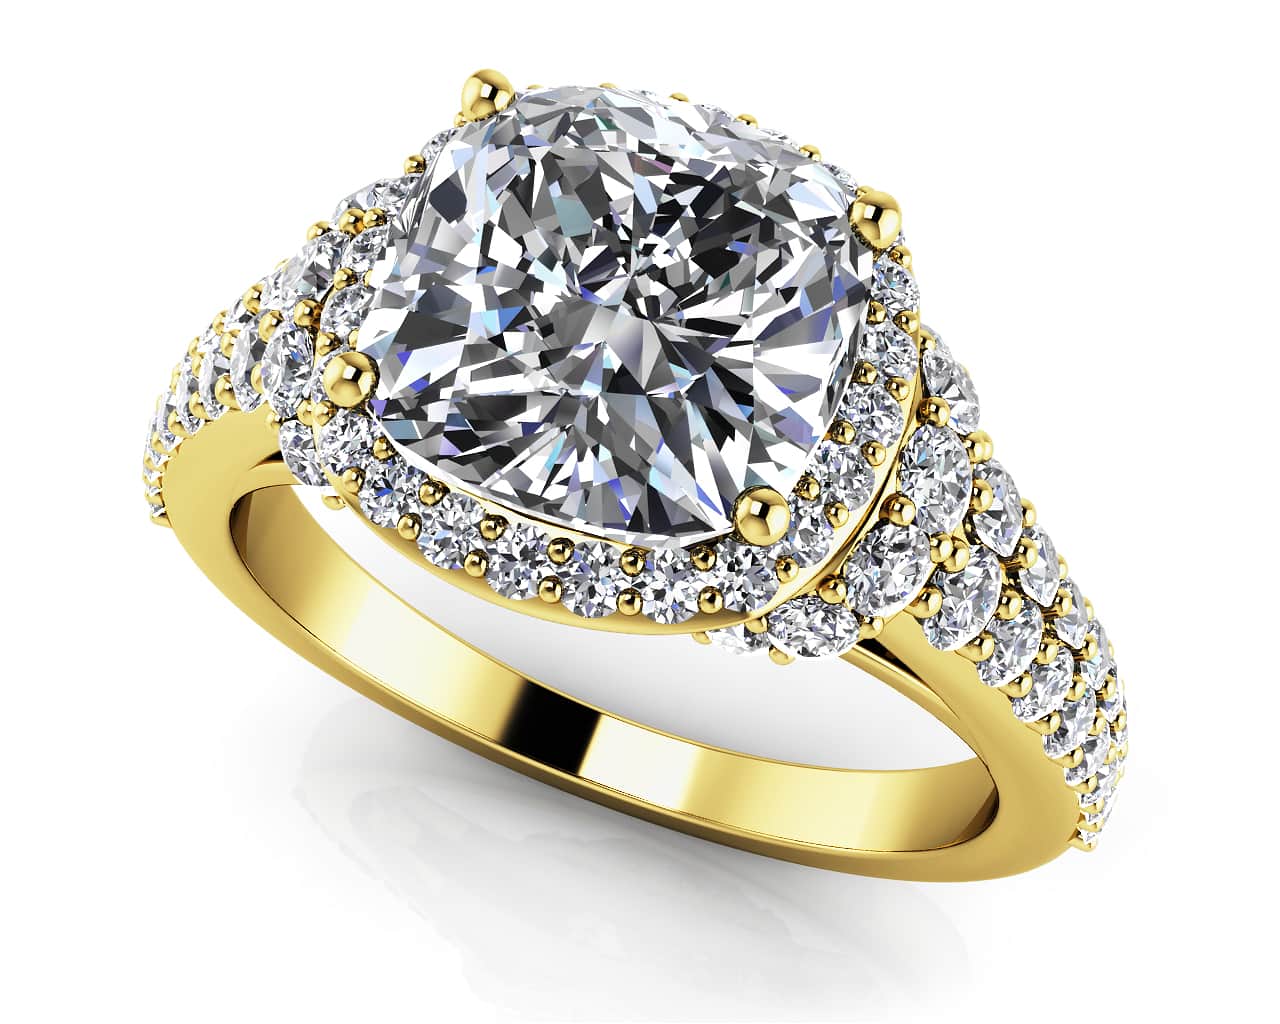 Cloud Nine Gold and Diamonds Engagement Ring